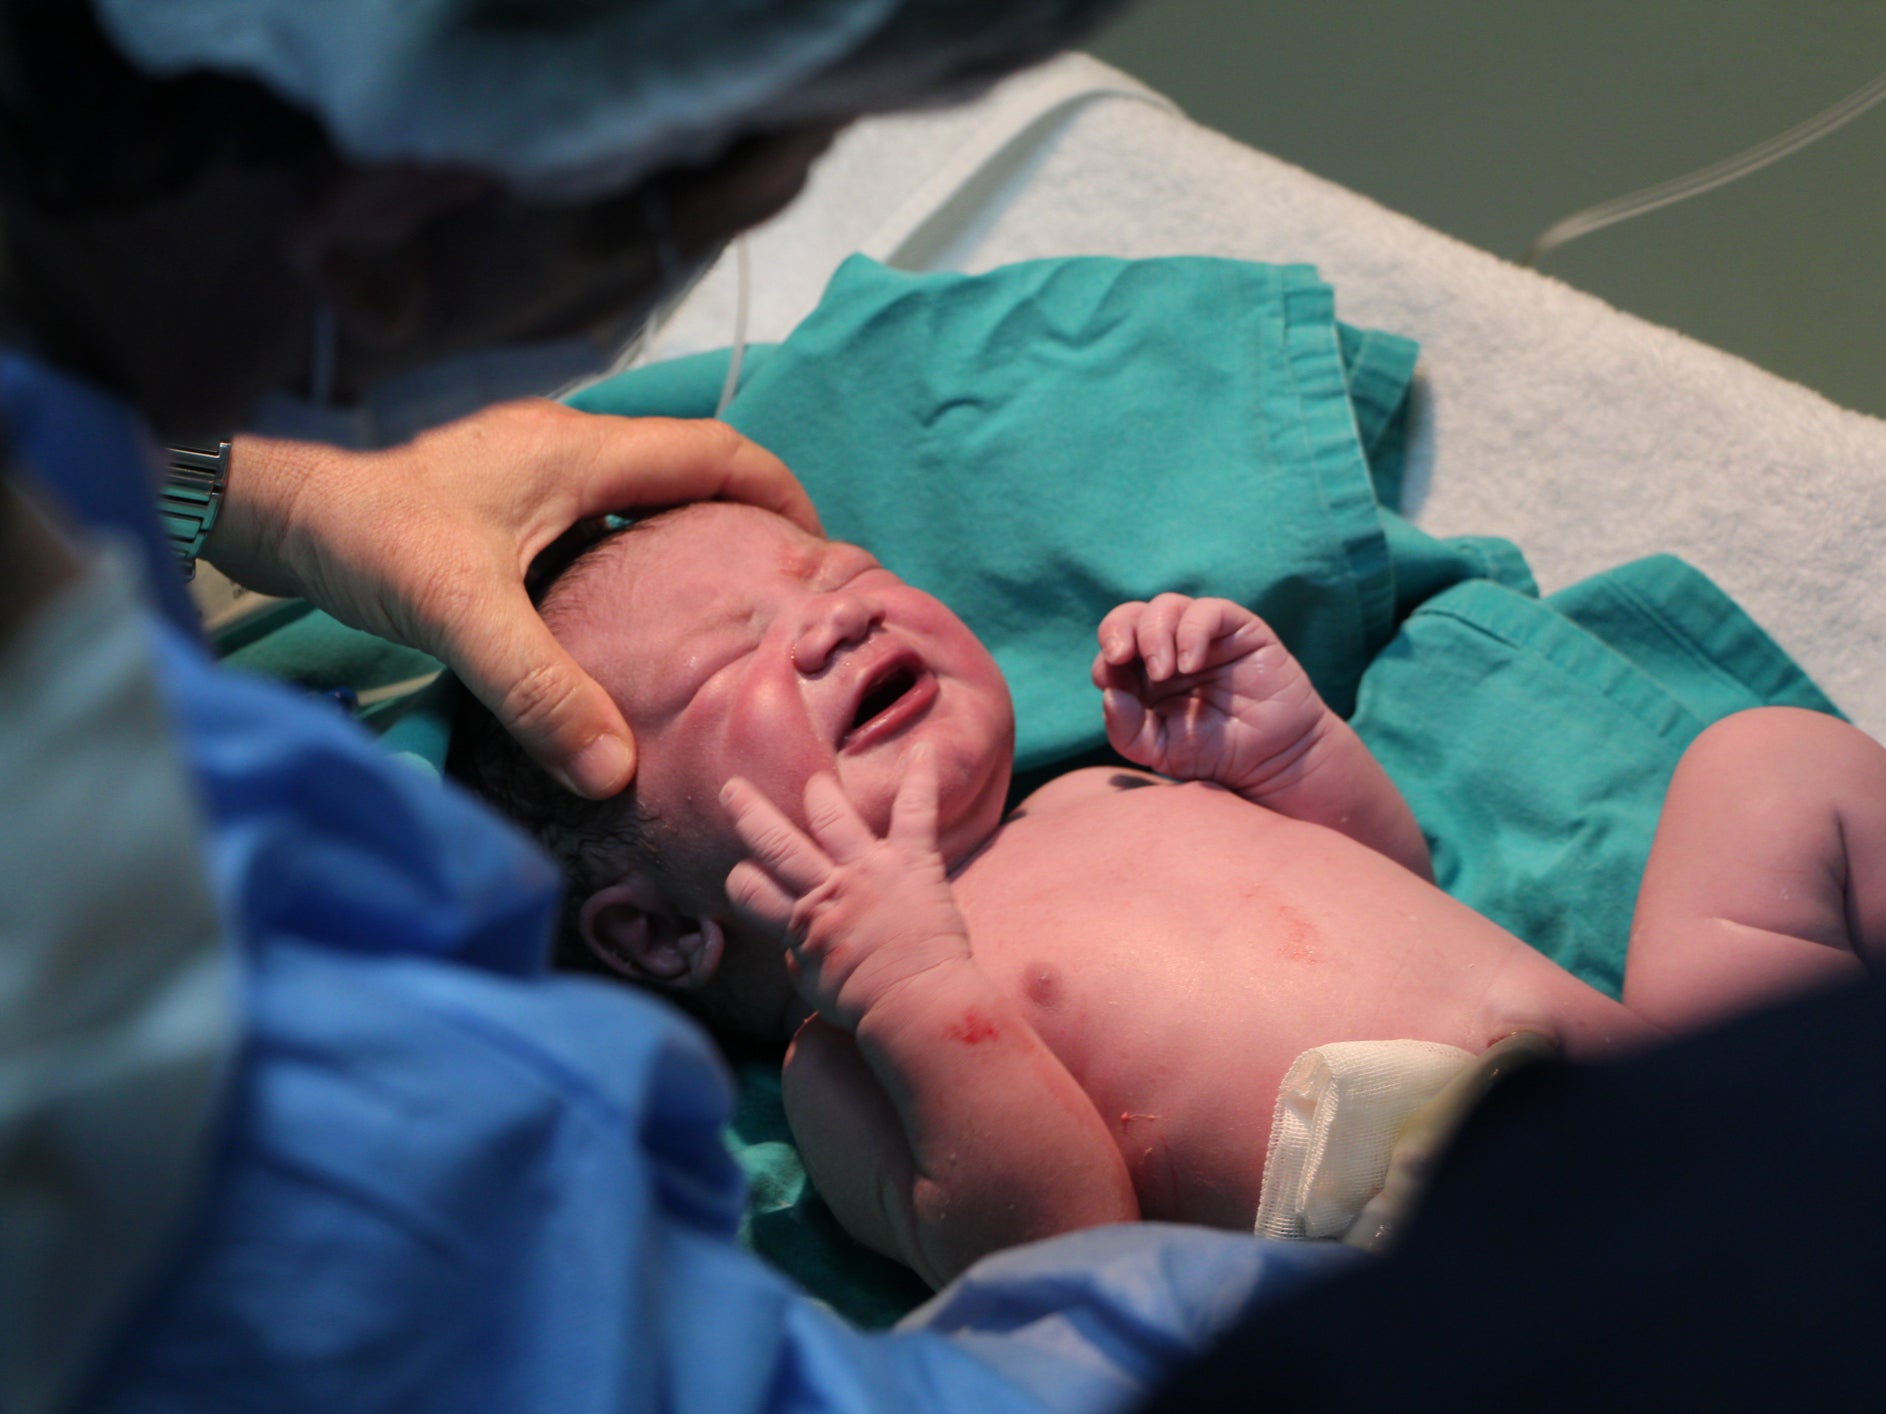 The NHS is short of almost 2,000 midwives